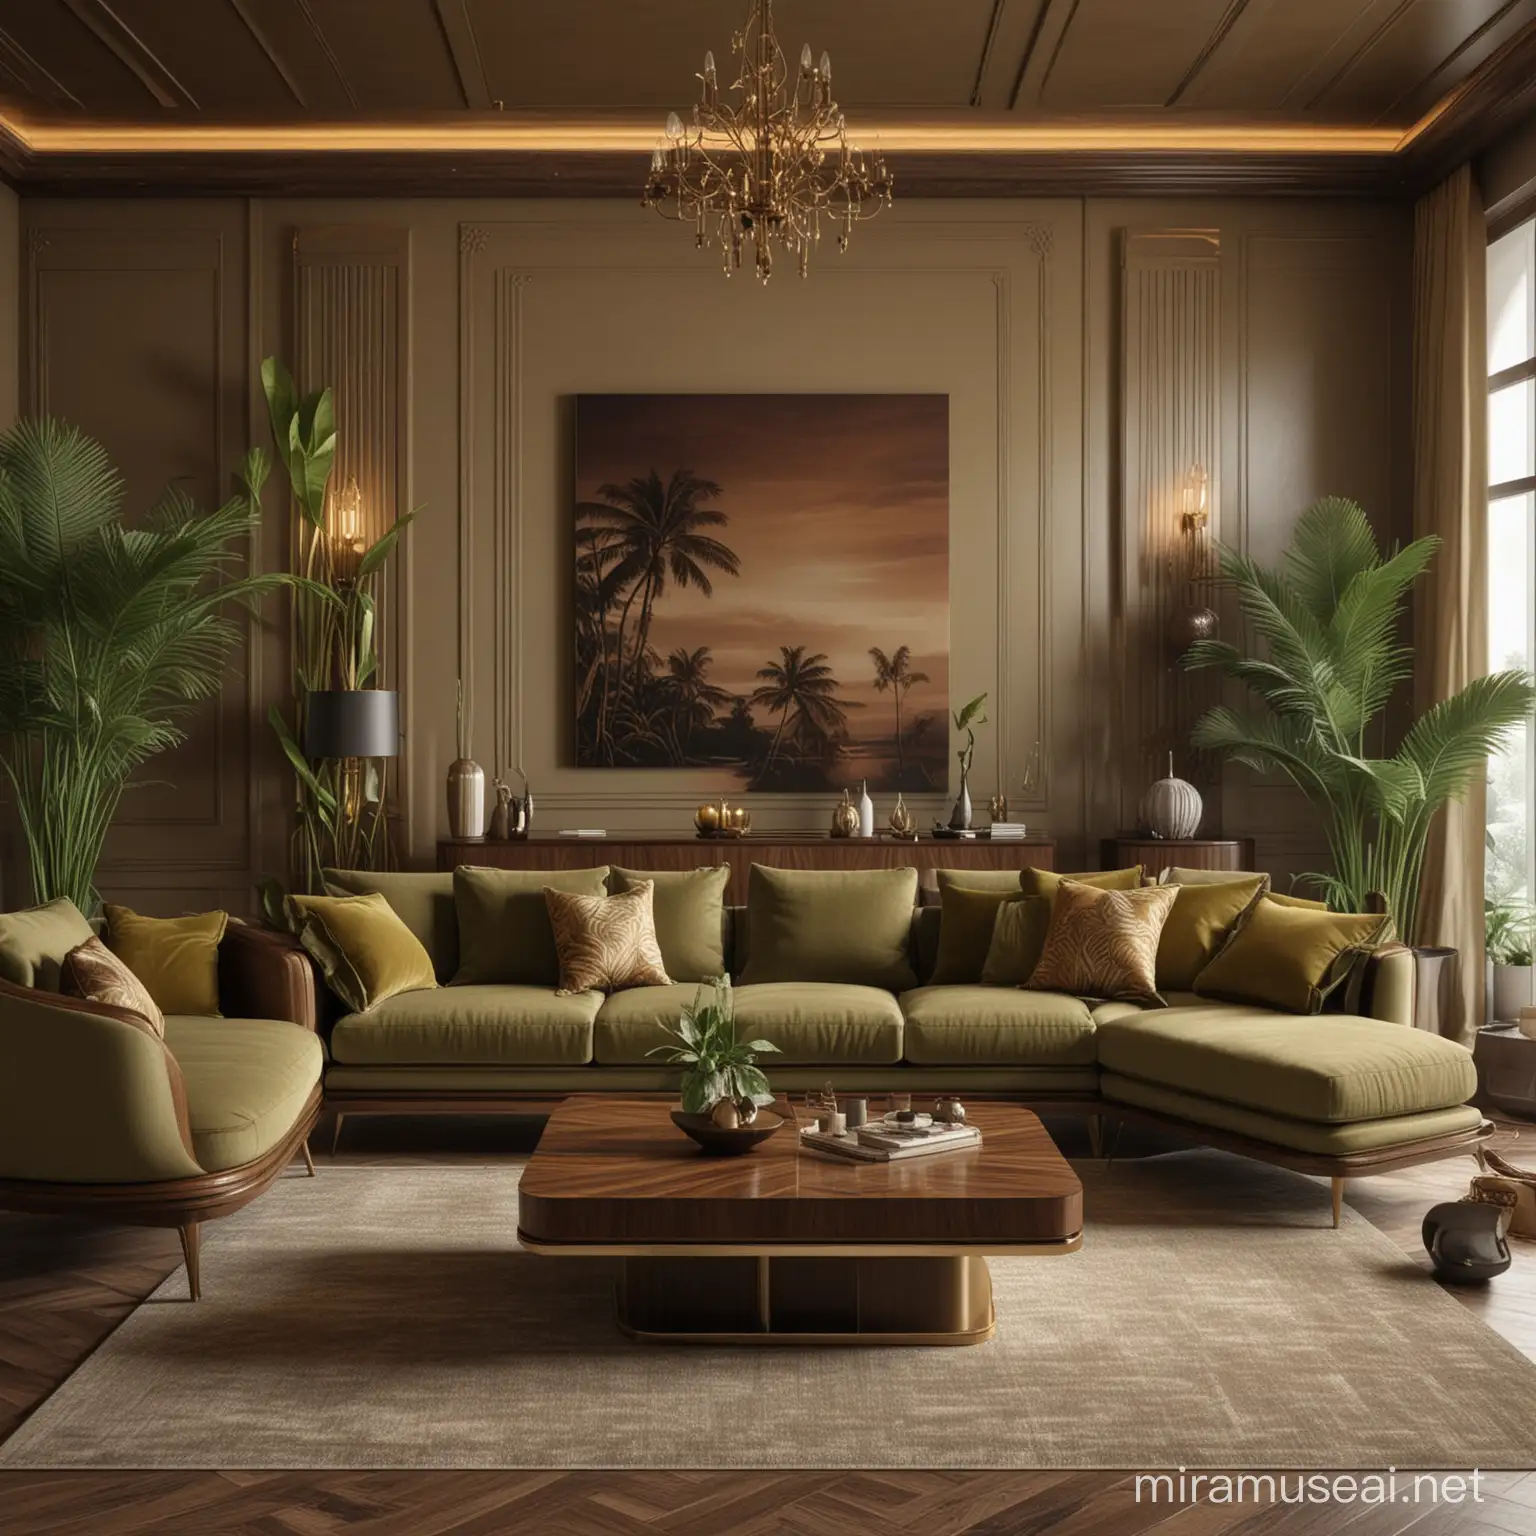 Futuristic Tropical Sicily Living Room with Luxurious Sofa Set and Bronze Gold Accents